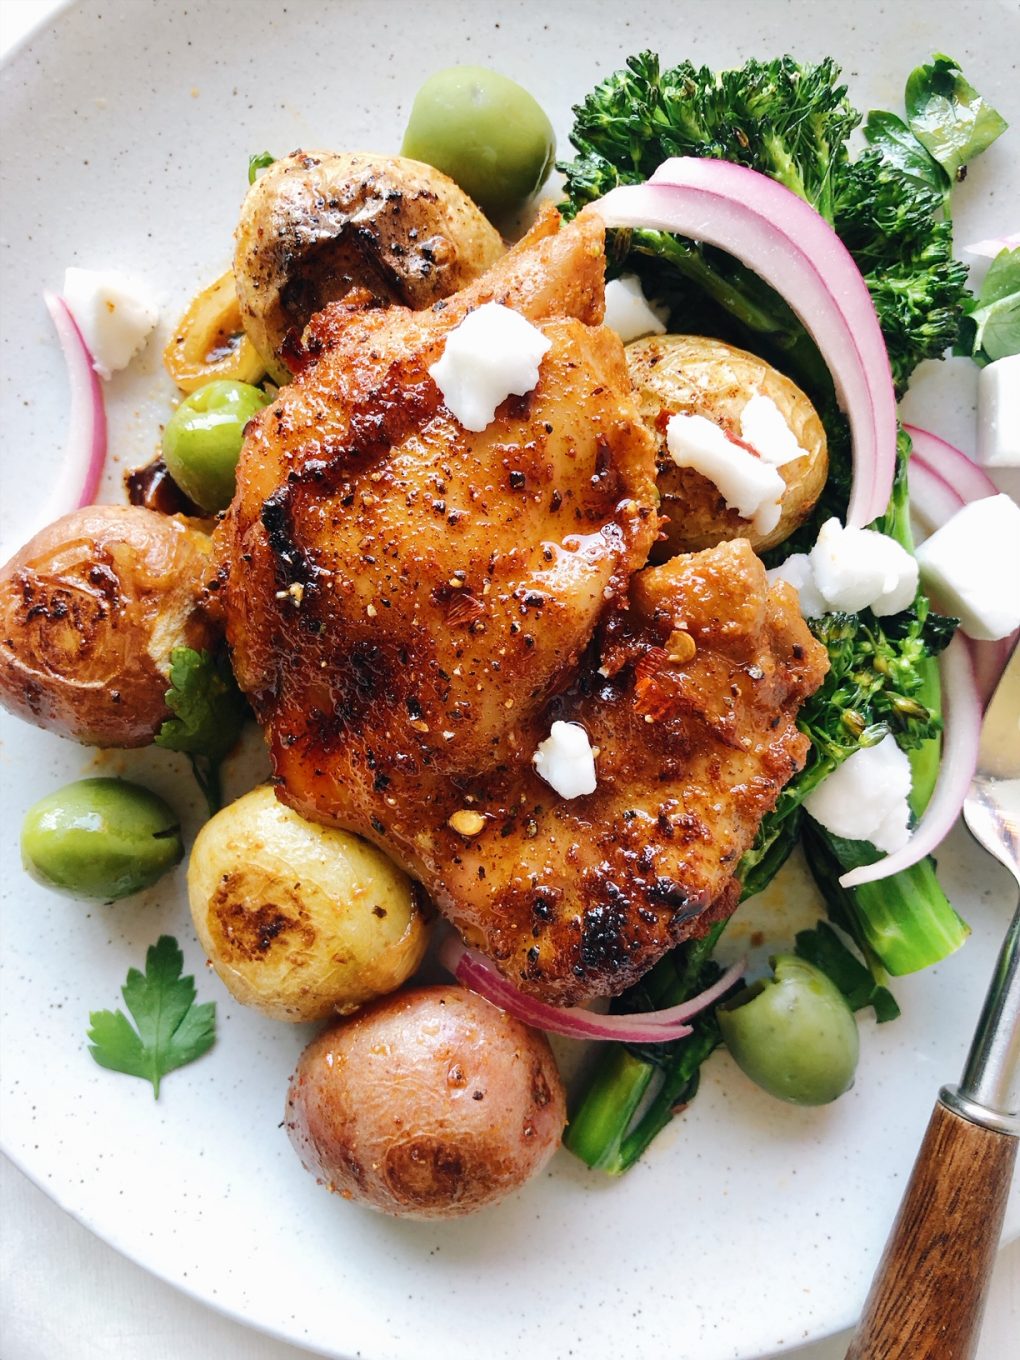 A close up view of roasted paprika spiced chicken thigh over roasted baby potatoes and broccolini with green olives, pickled red onions, and dairy free feta cheese